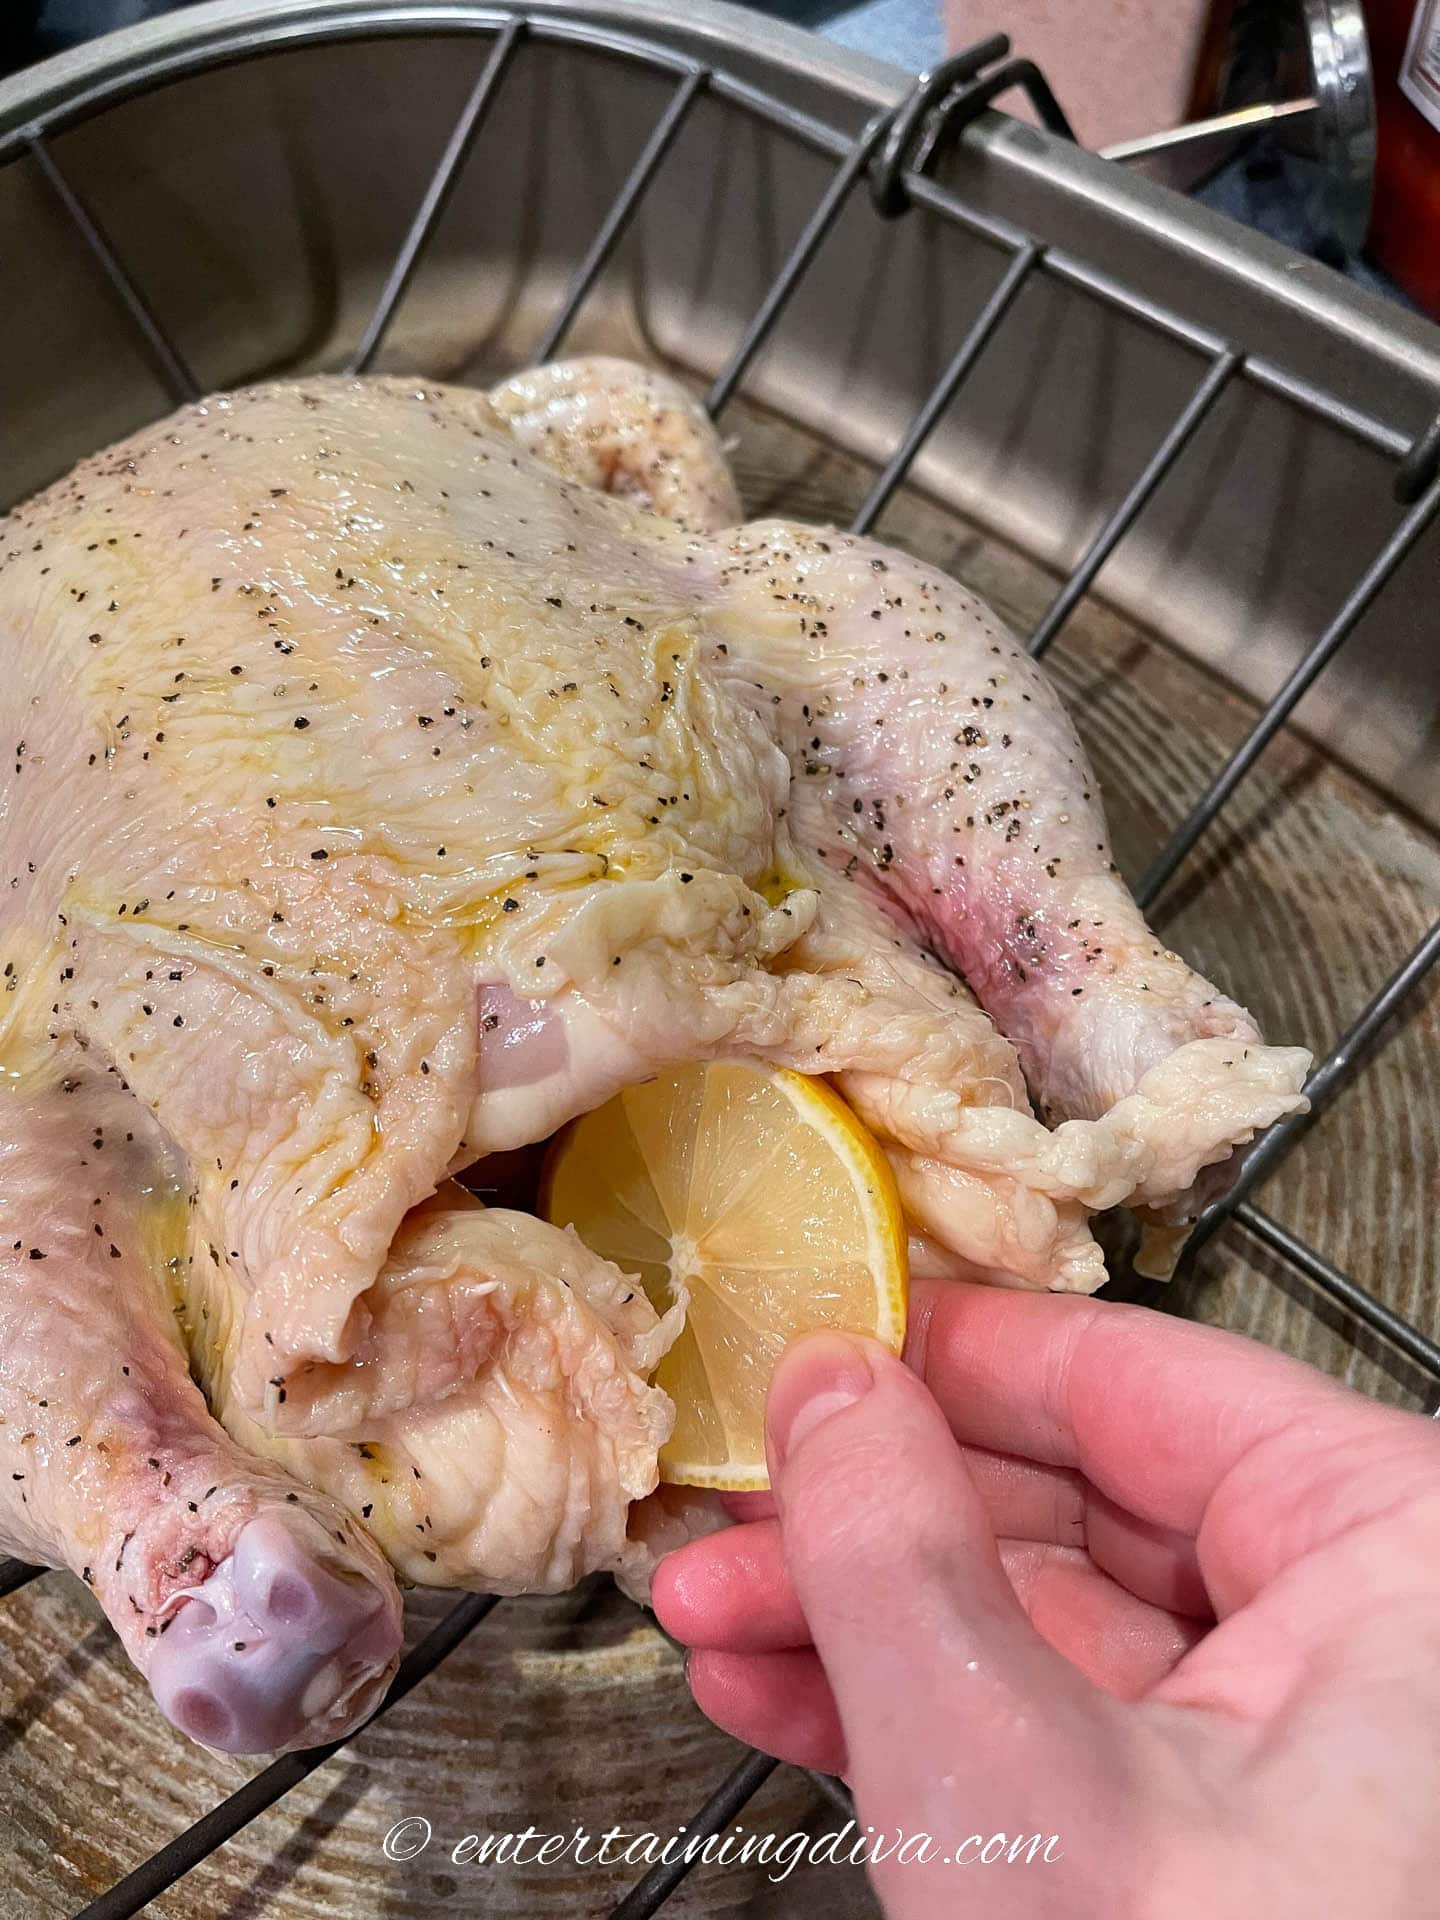 Turkey being stuffed with lemons and thyme